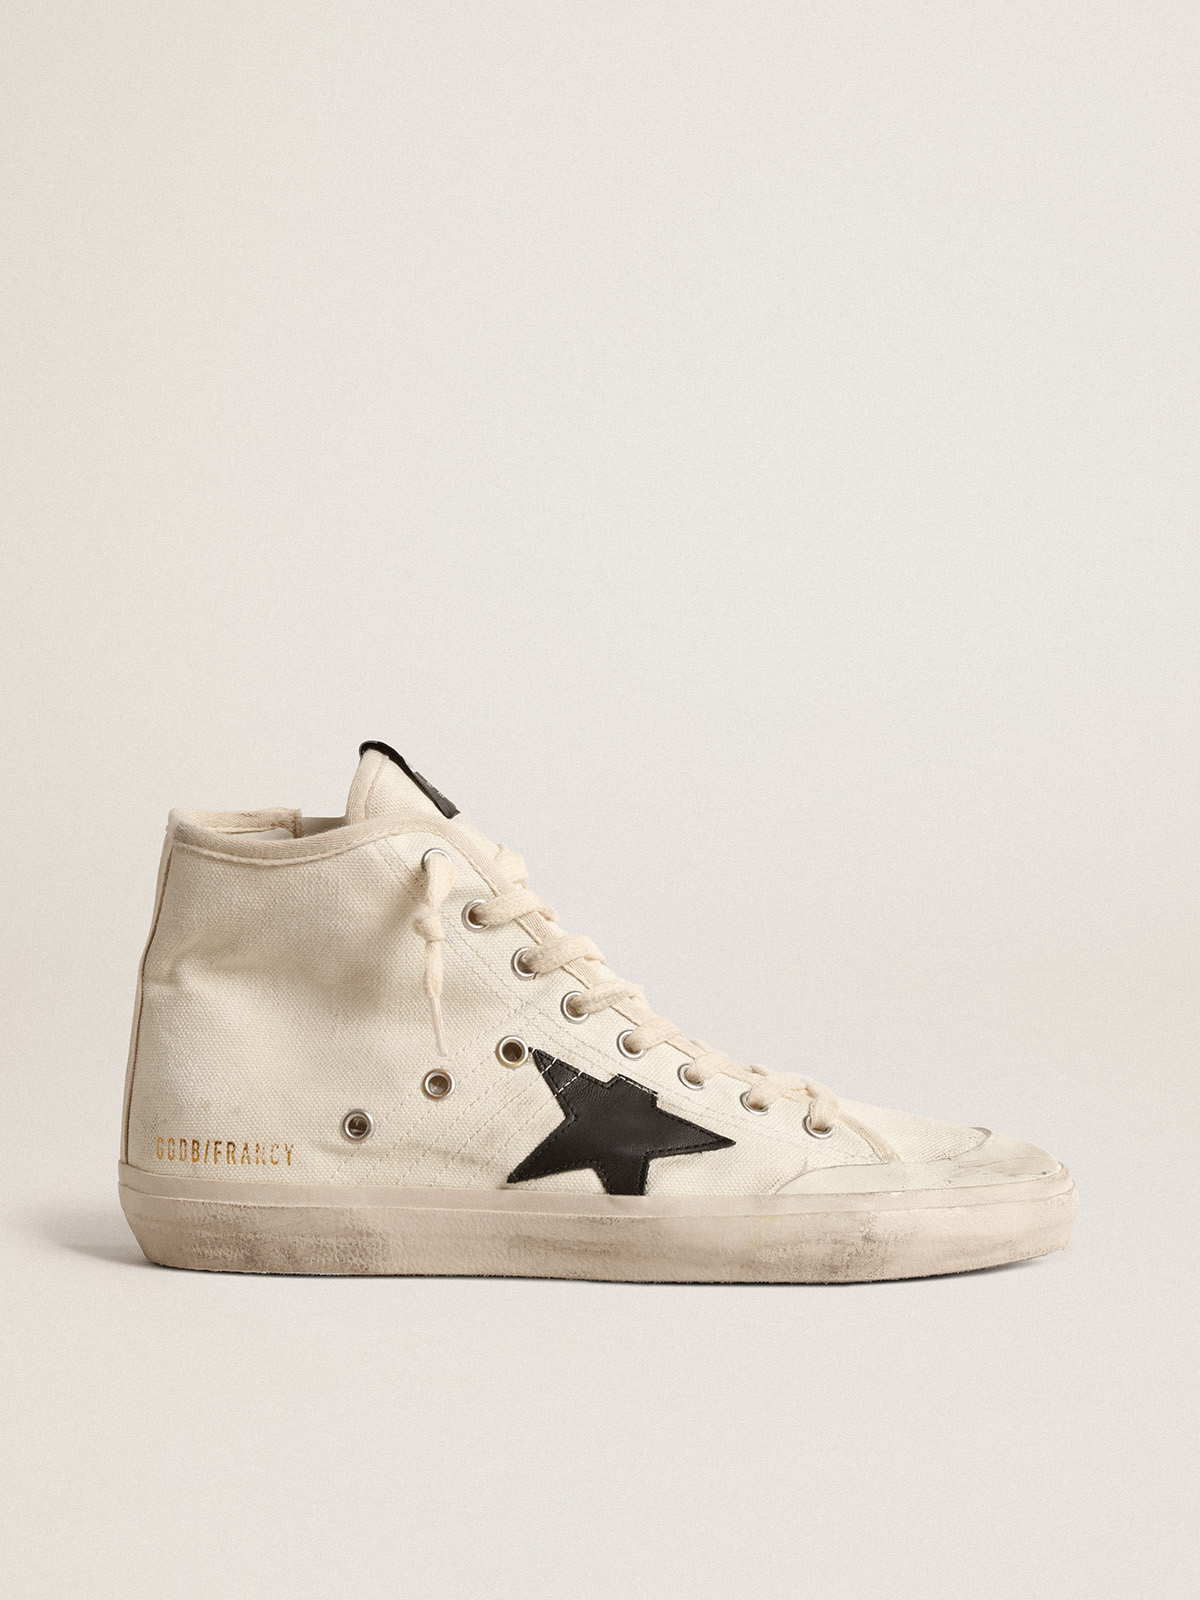 Francy Penstar in canvas with black star and red stitching | Golden Goose